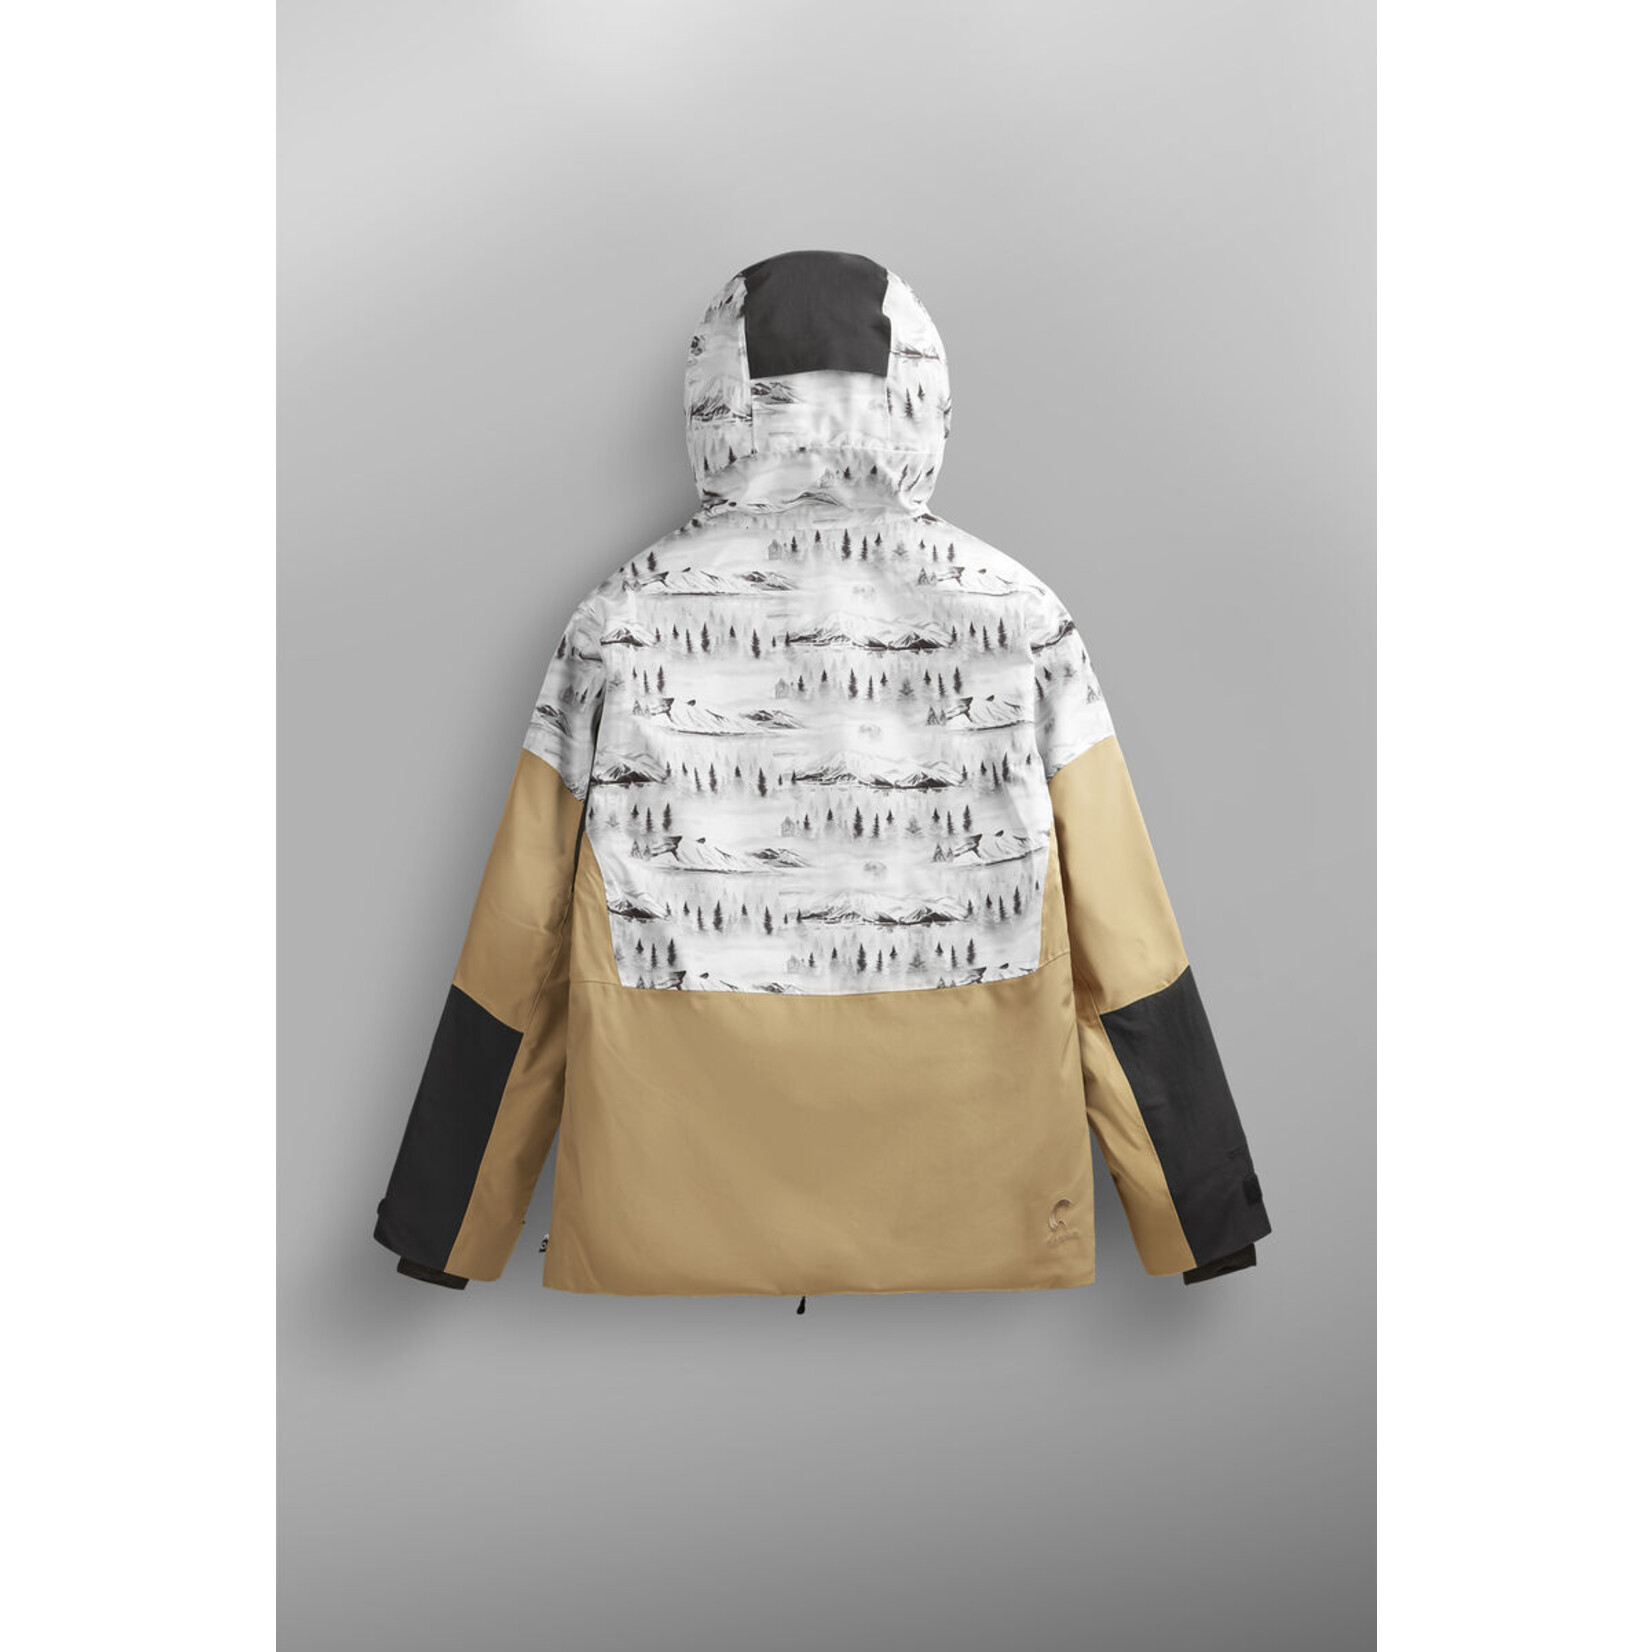 Picture Organic Picture Organic Men's Stone Printed Jacket